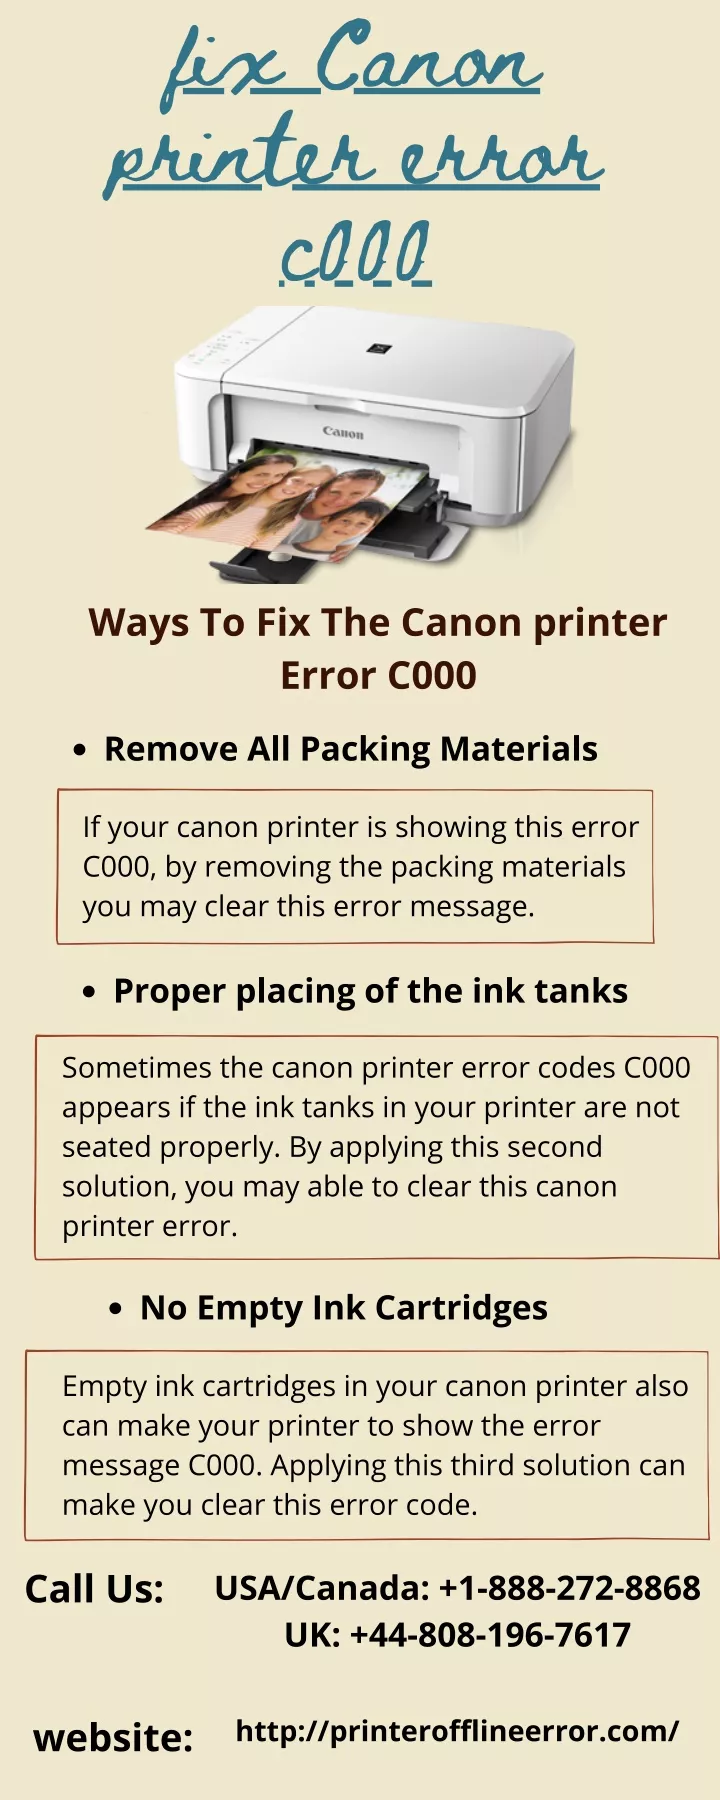 Ppt Guide To Fix Canon Printer Error C000 Powerpoint Presentation Free Download Id10801581 7268